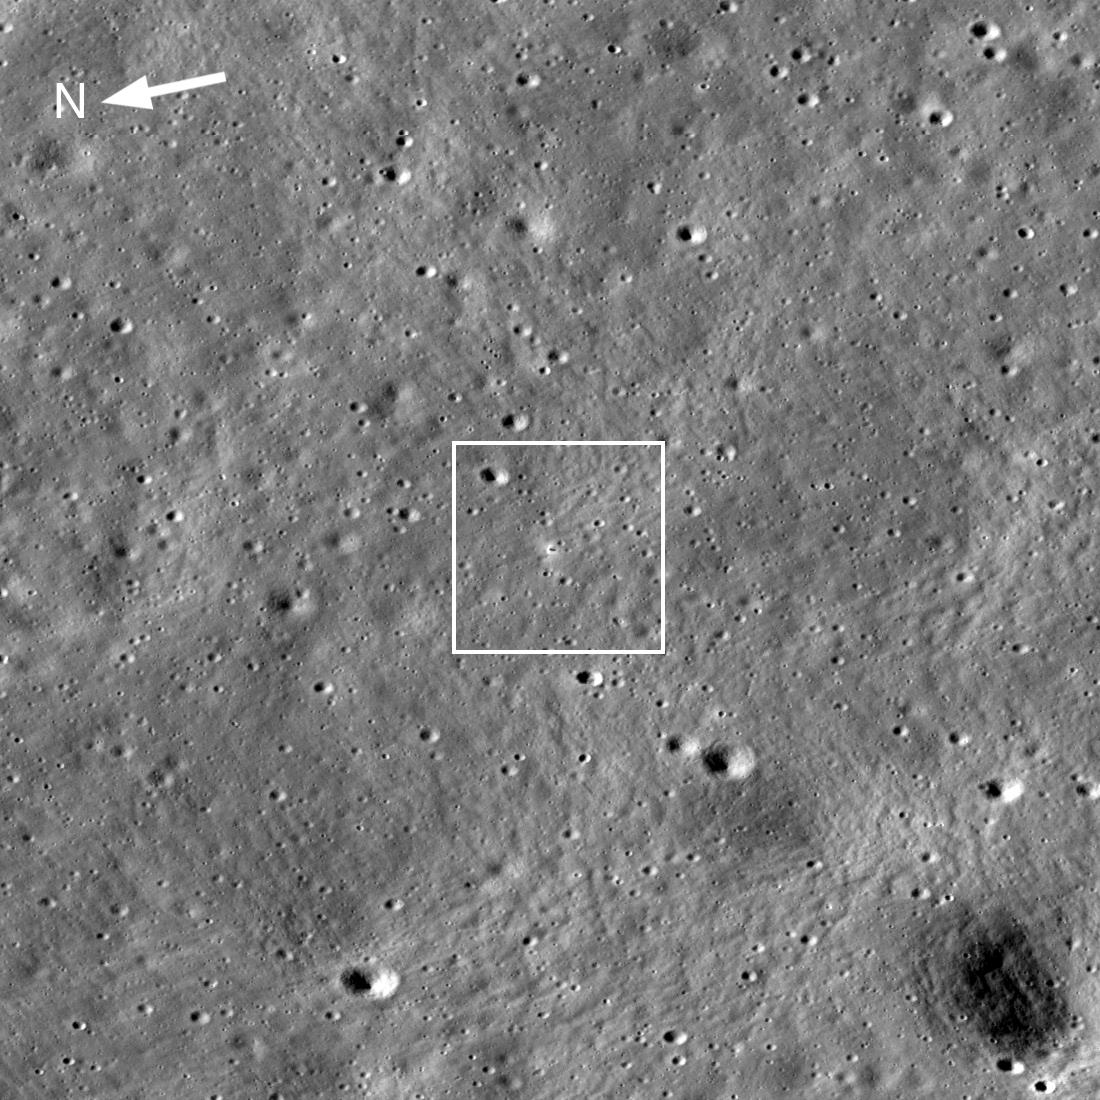 Chandrayaan-3 lander touched down about 600 km from Moon’s south pole, says NASA; releases image